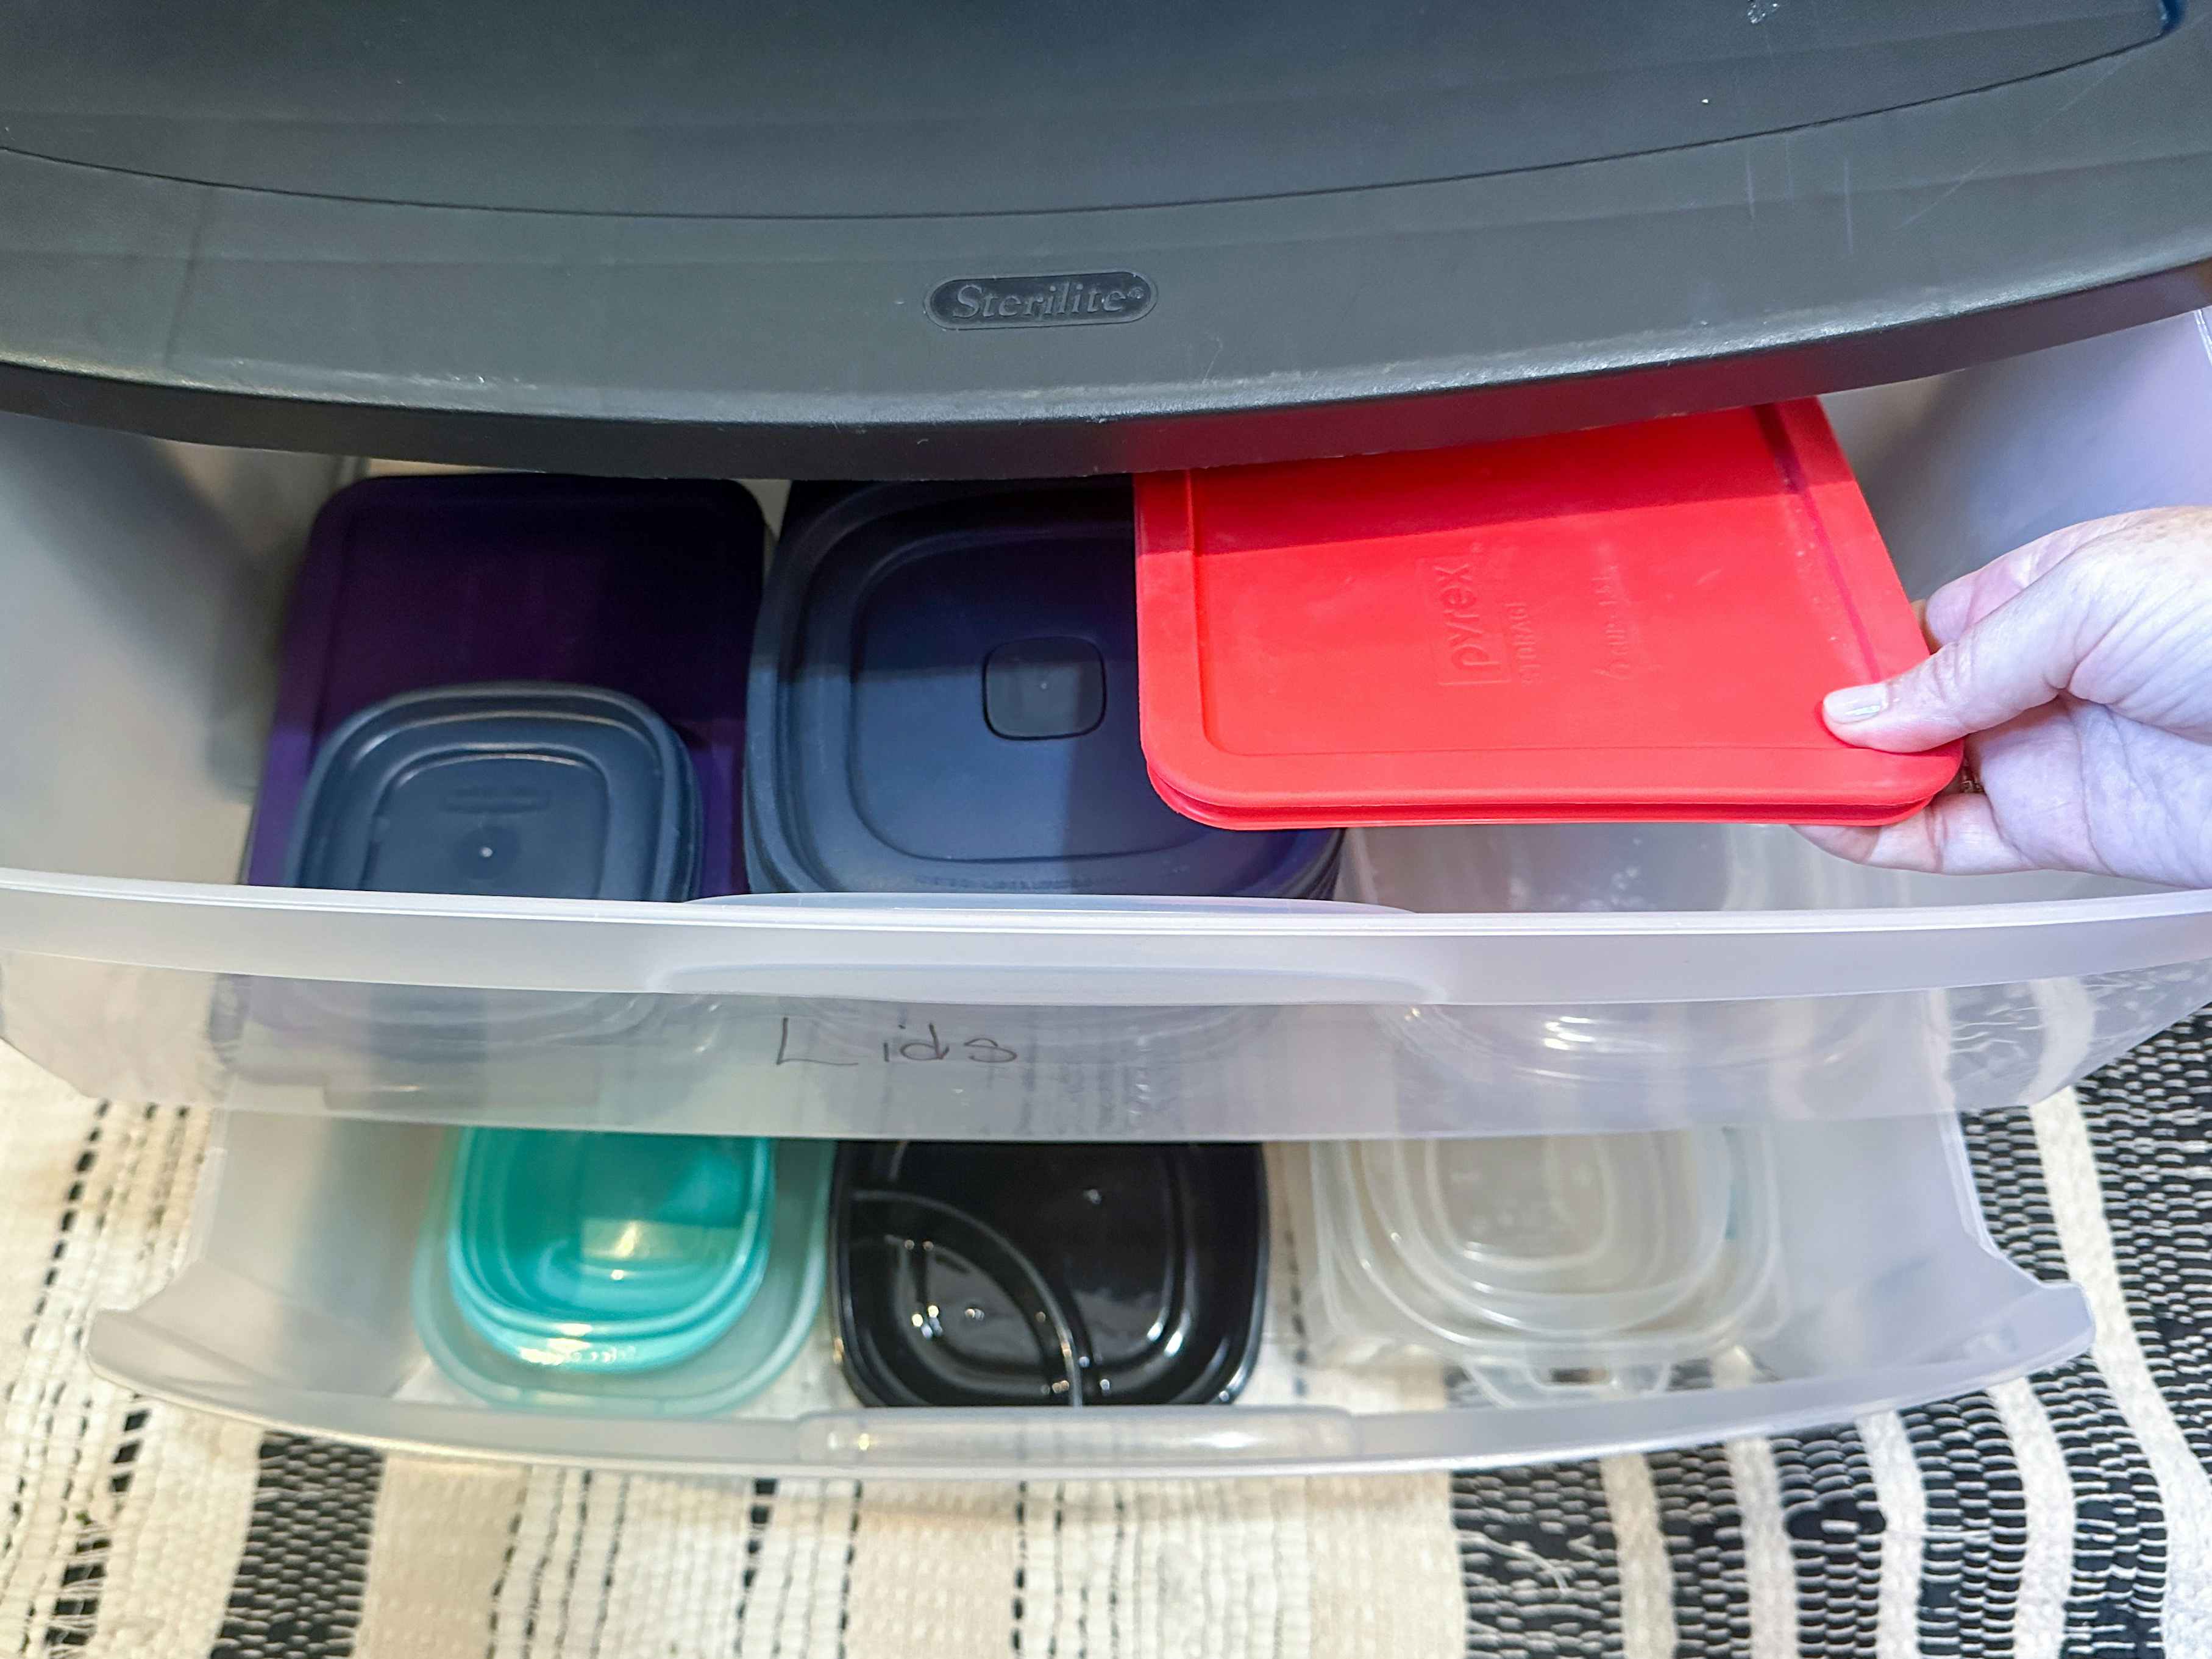 7+ Ways to Organize Food Storage Containers and Tupperware